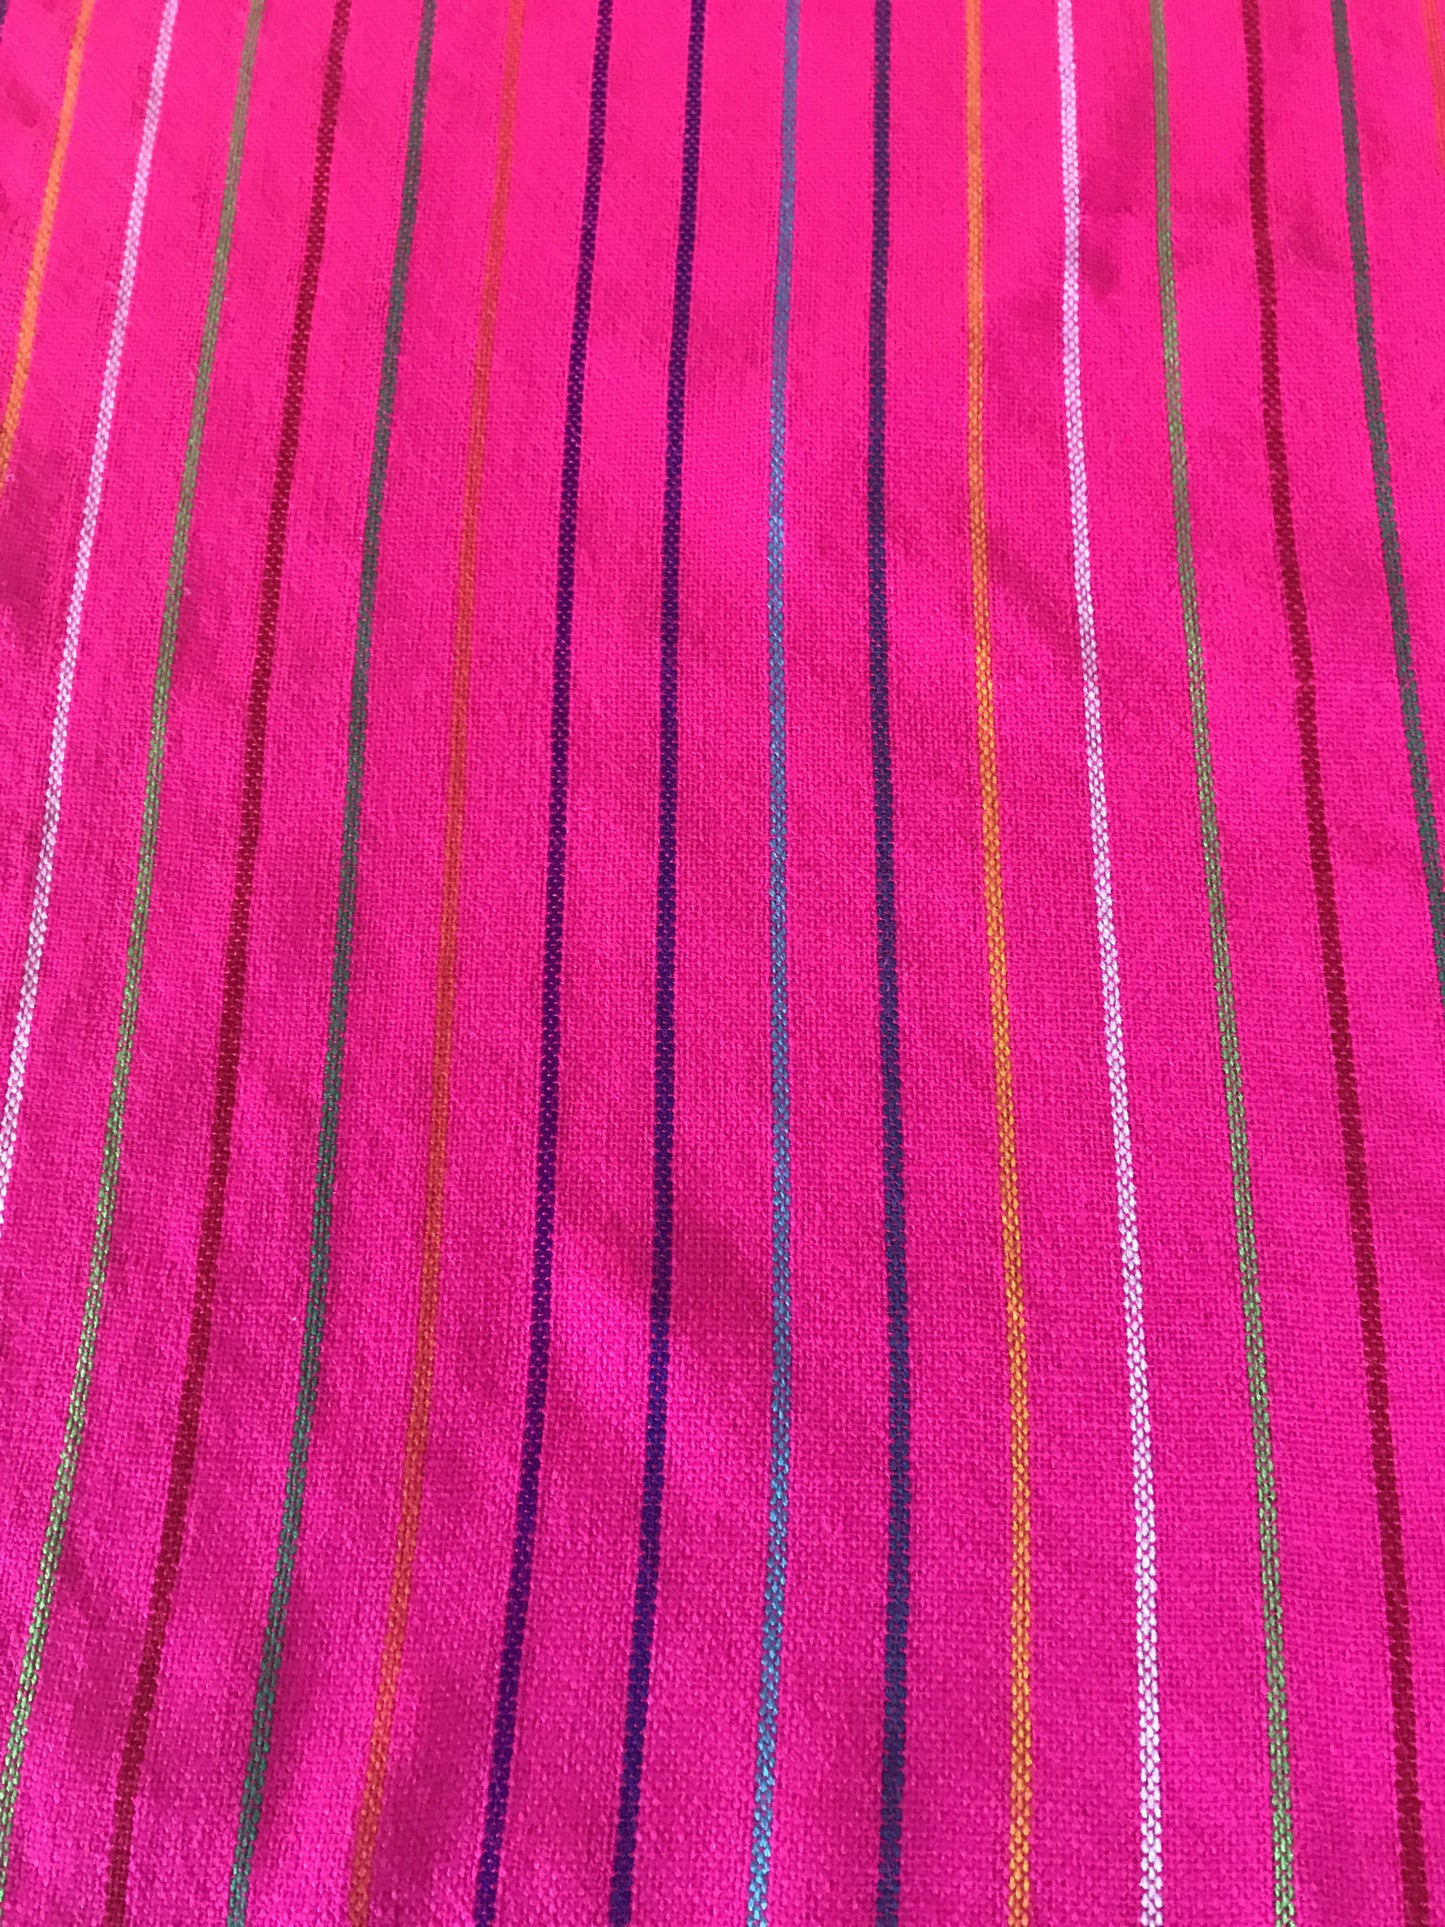 Mexican fabric Table Runner Colorful Pink stripes - MesaChic - 5